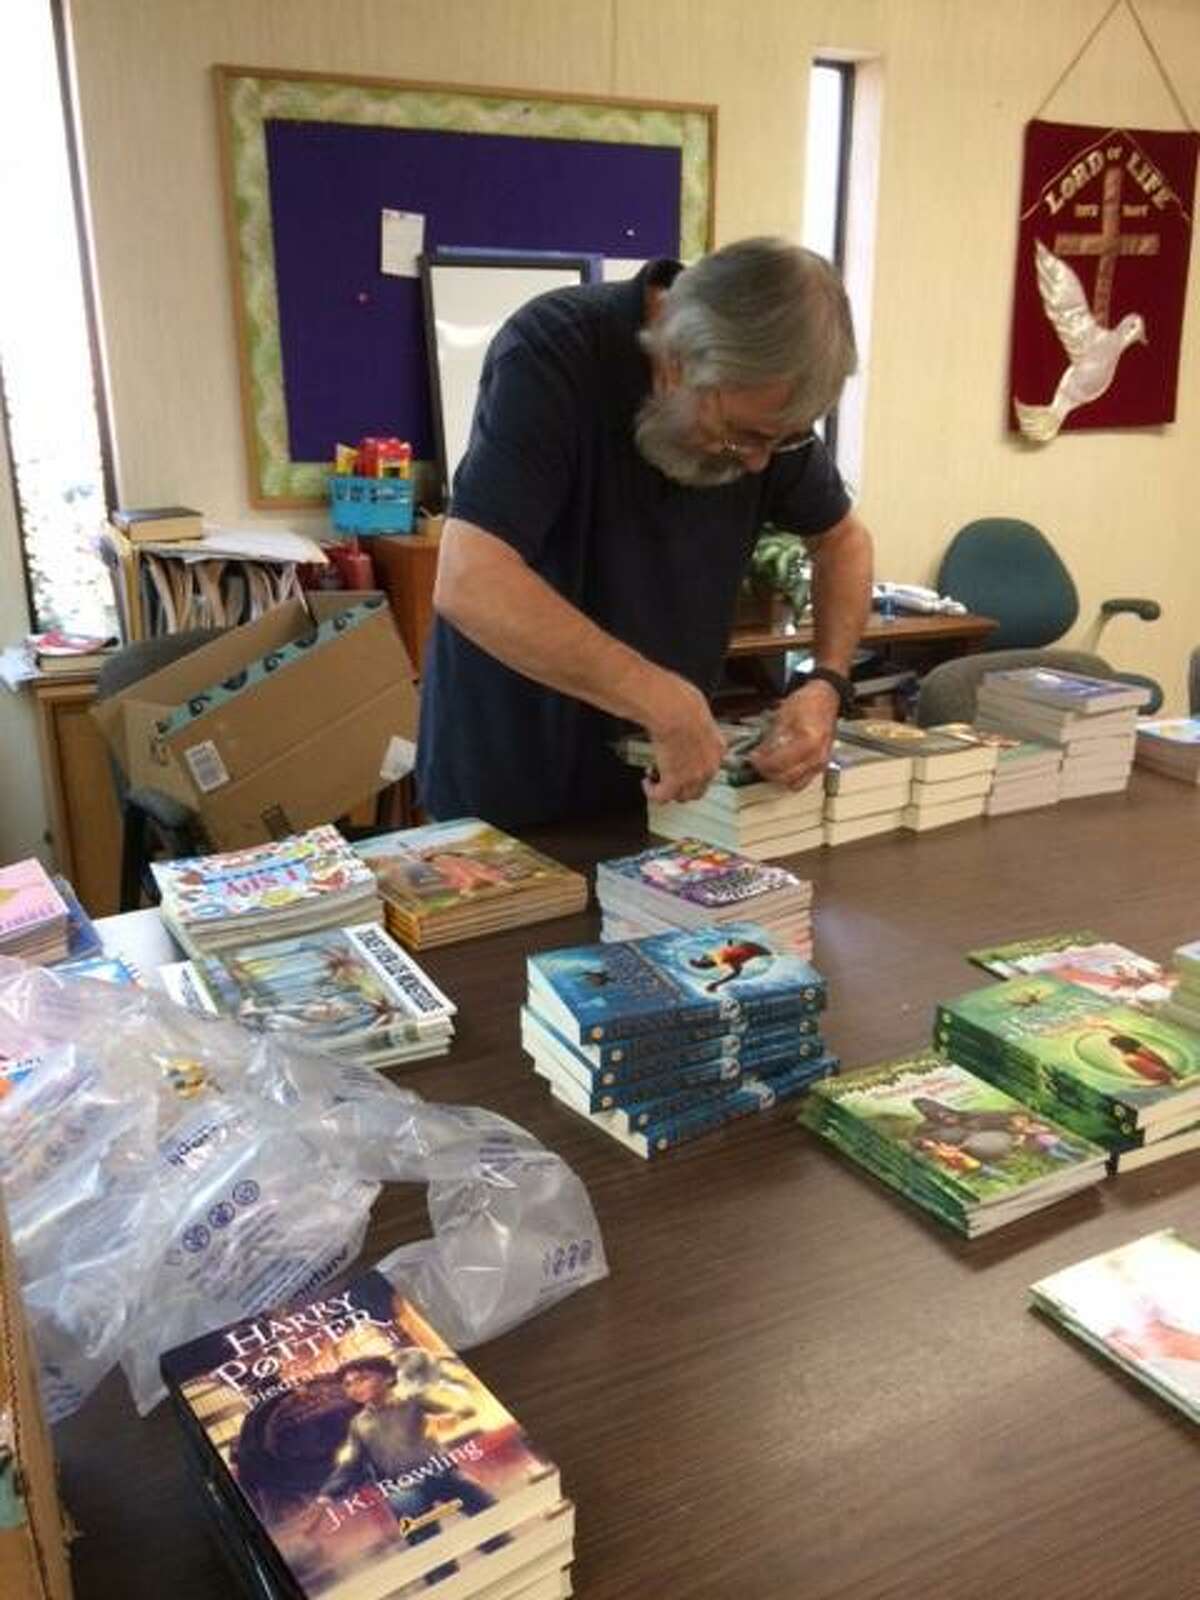 Michael Lawrence-Weden, pastor at Lord of Life Lutheran Church in San Antonio, opens the boxes of gifts and cards in this undated courtesy photo provided by Lawrence-Weden sent to him by the Lutheran Immigration and Refugee Service program. On Monday morning Dec 24, 2018, he and his wife, Rebecca Lawrence-Weden, loaded up the 1,600 cards and 286 children’s books (in Spanish) and delivered them to Dilley’s South Texas Family Residential Center.